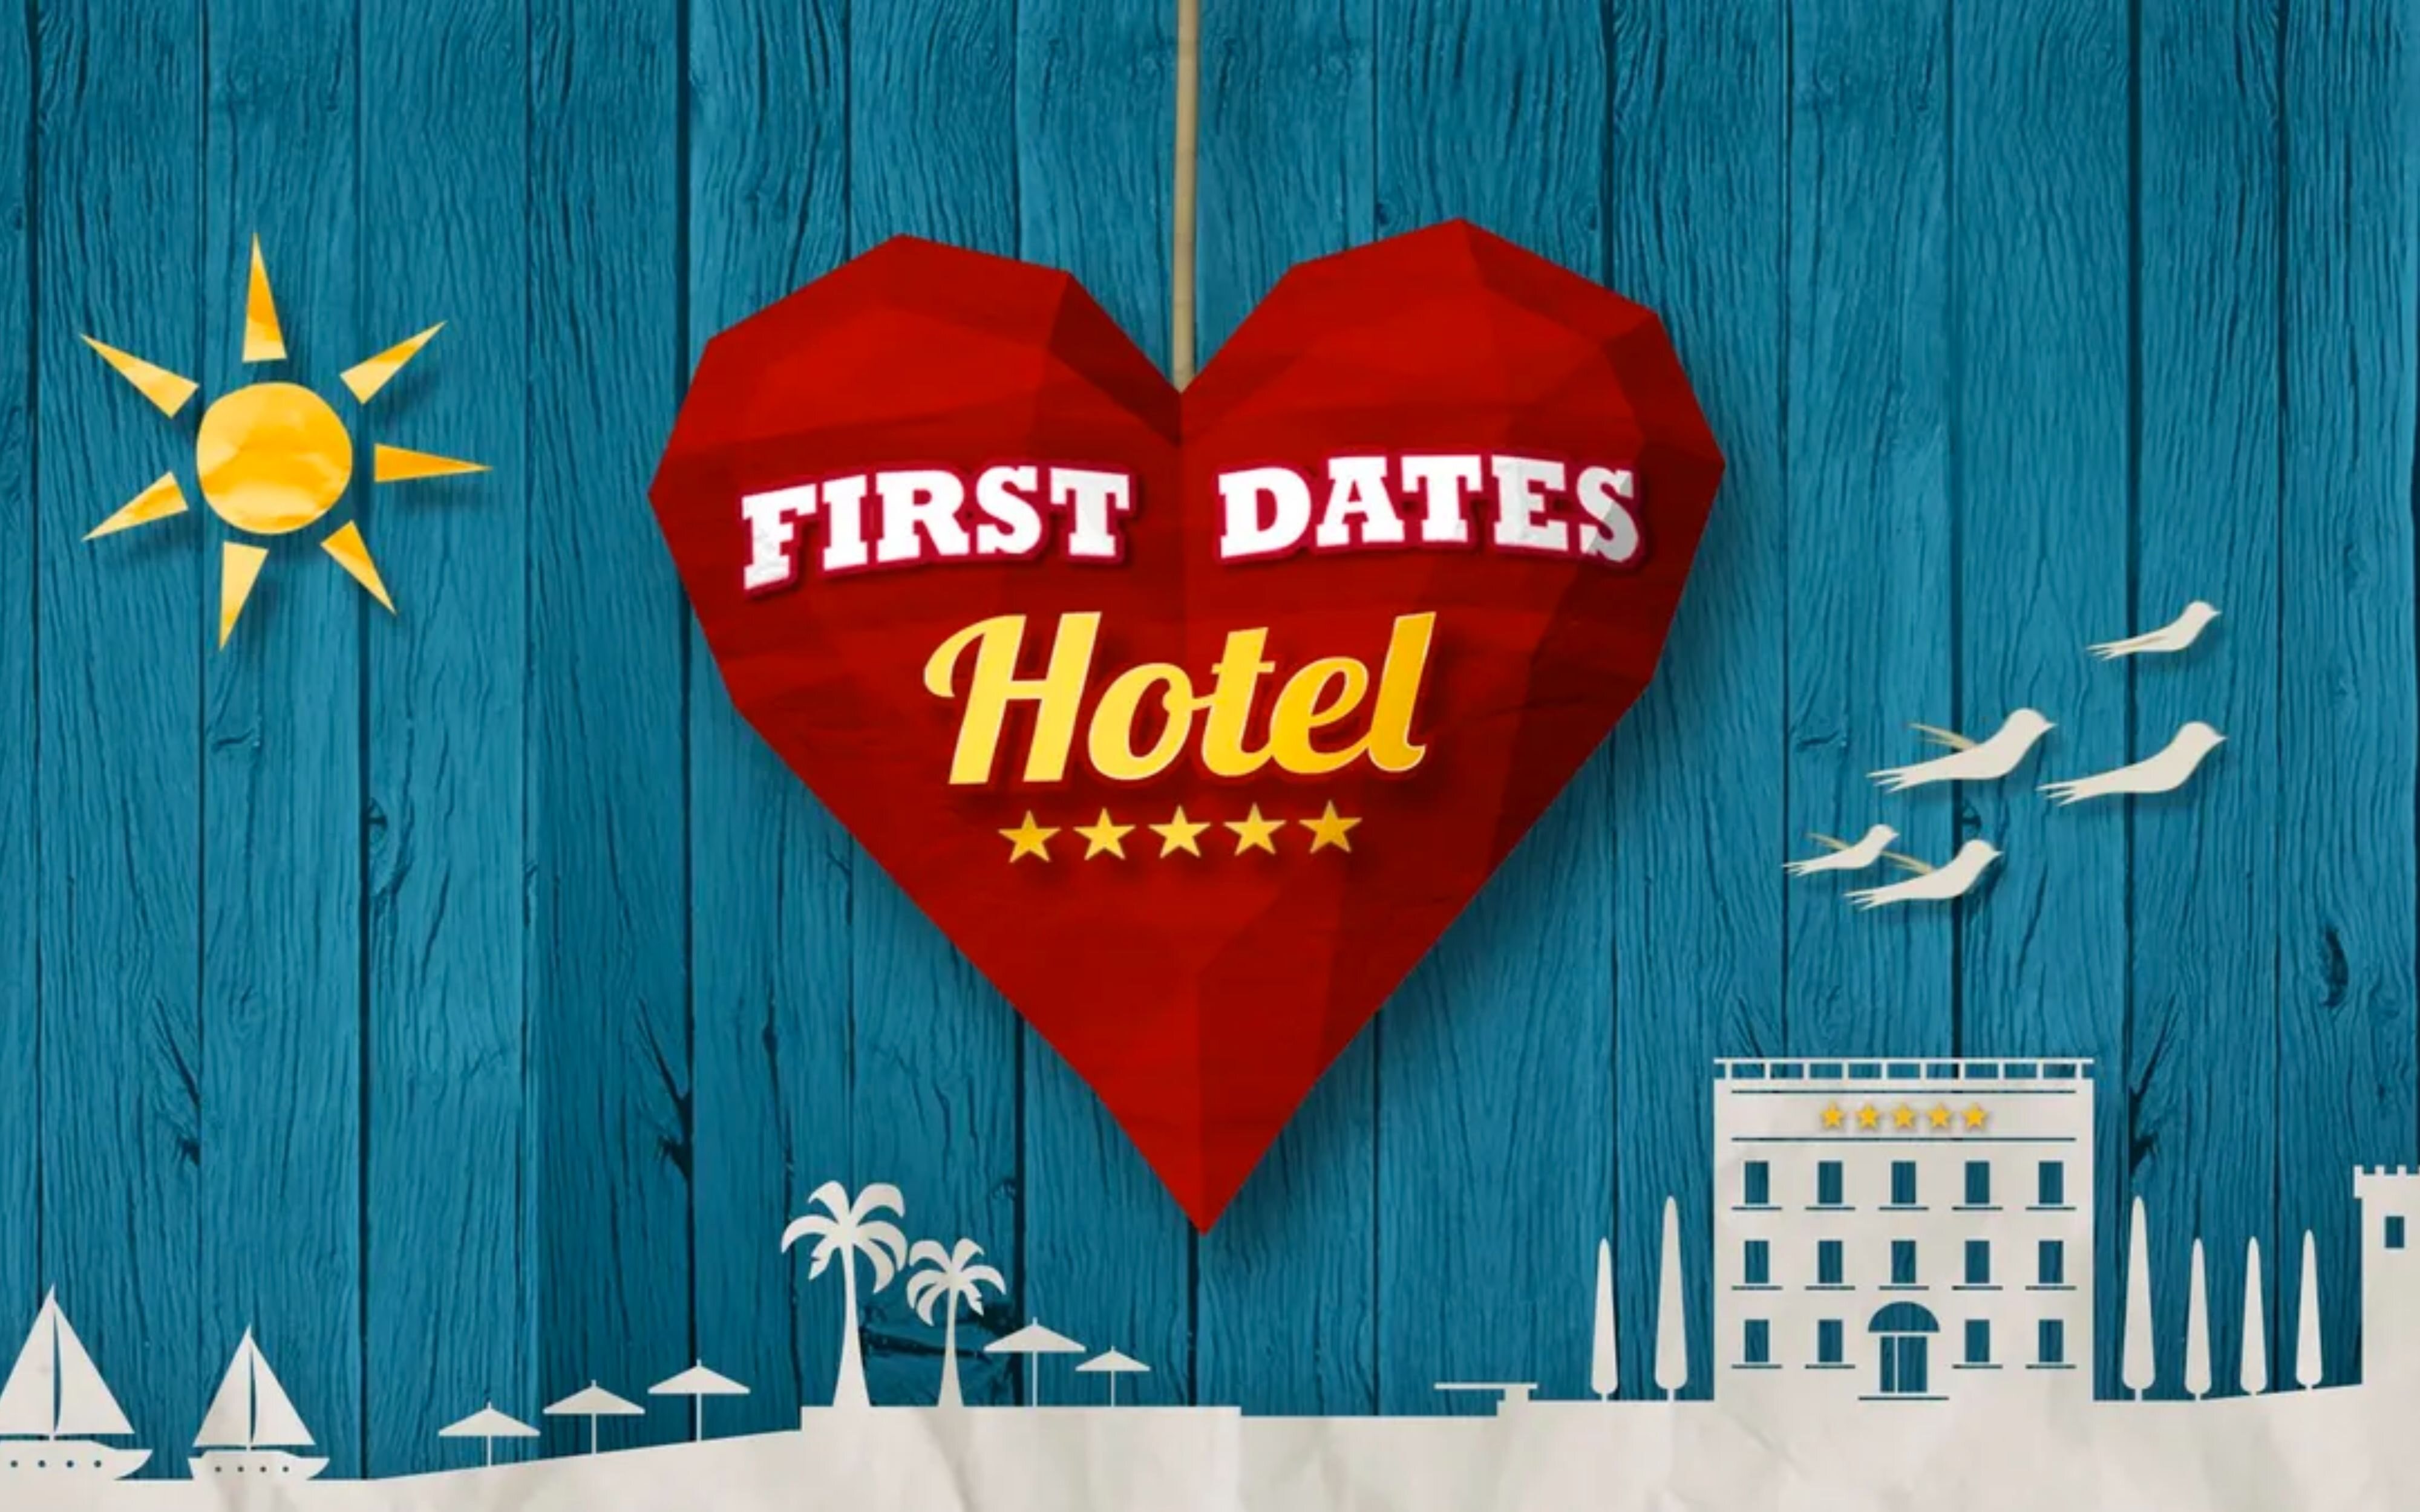 'First Dates Hotel'